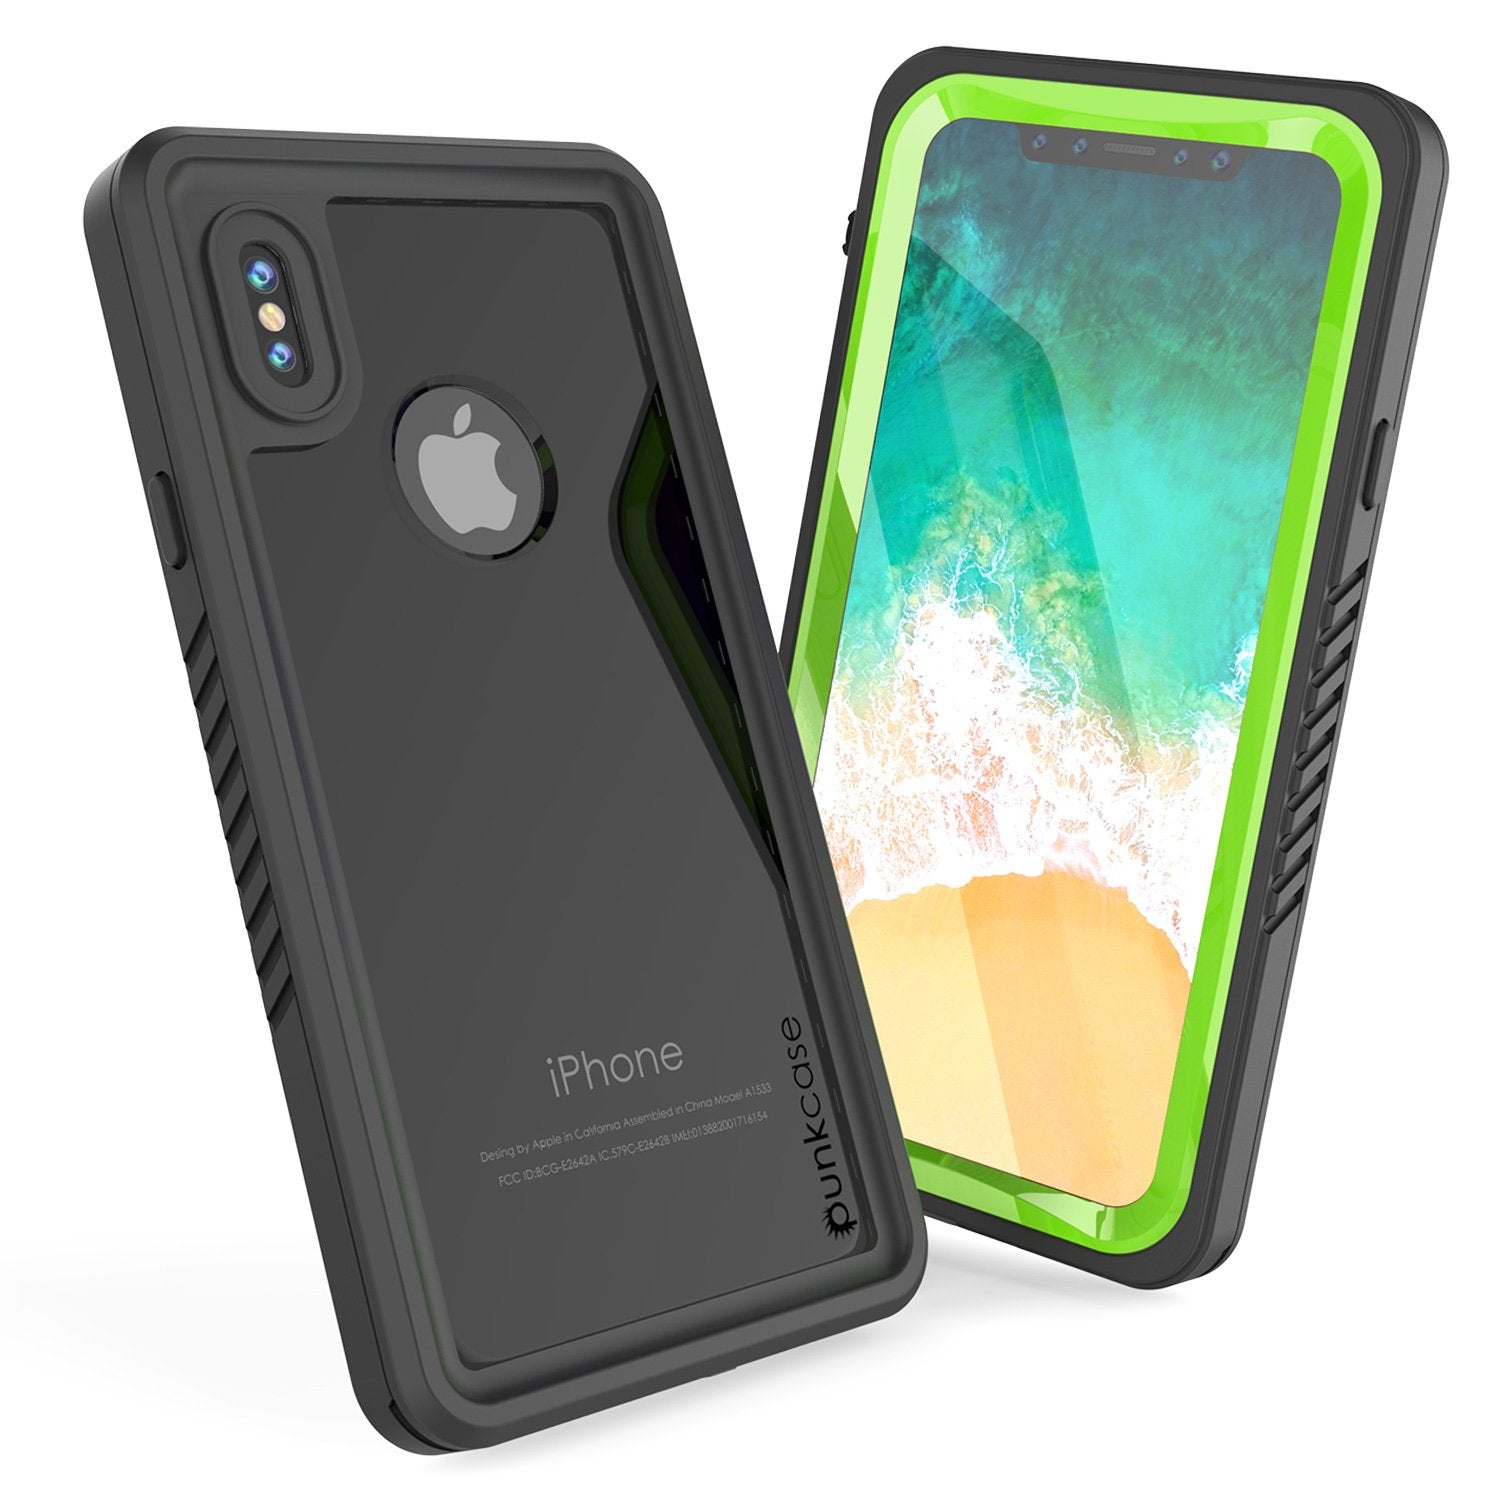 iPhone X Case, Punkcase [Extreme Series] [Slim Fit] [IP68 Certified] [Shockproof] [Snowproof] [Dirproof] Armor Cover W/ Built In Screen Protector for Apple iPhone 10 [LIGHT GREEN]